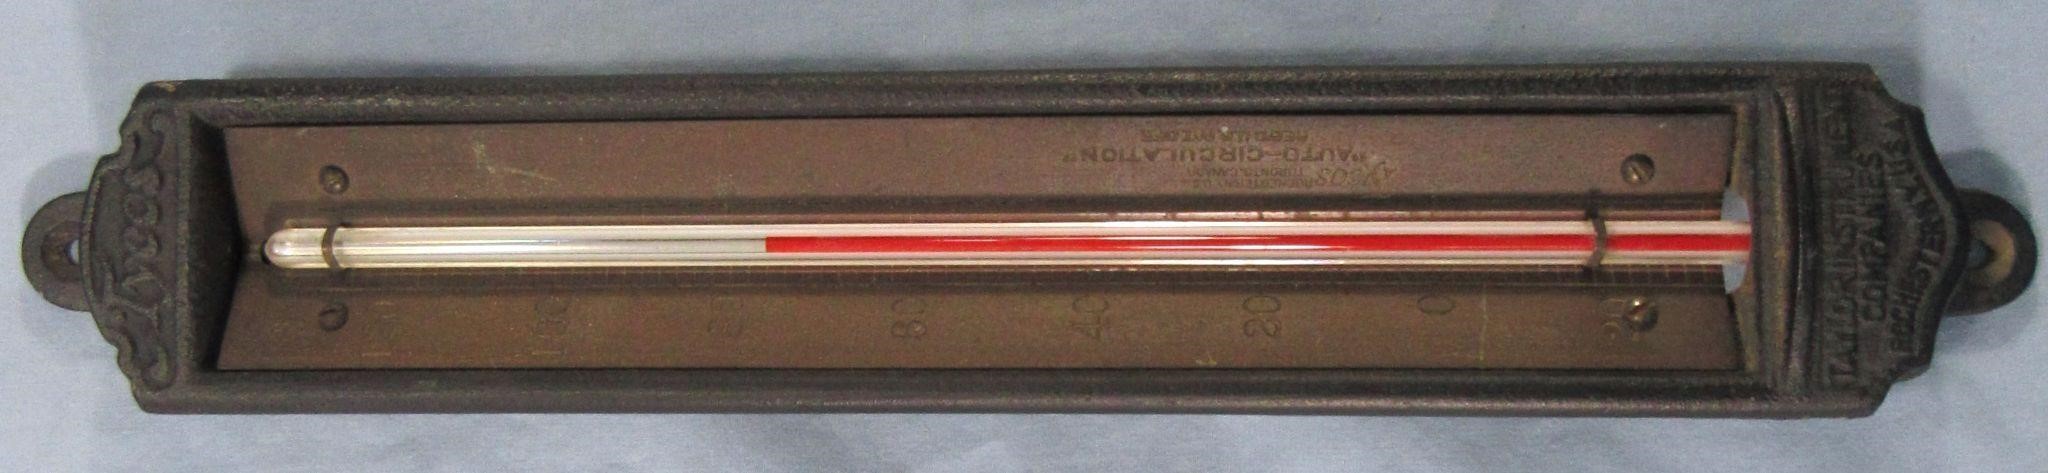 TAYLOR INSTRUMENT CAST IRON THERMOMETER